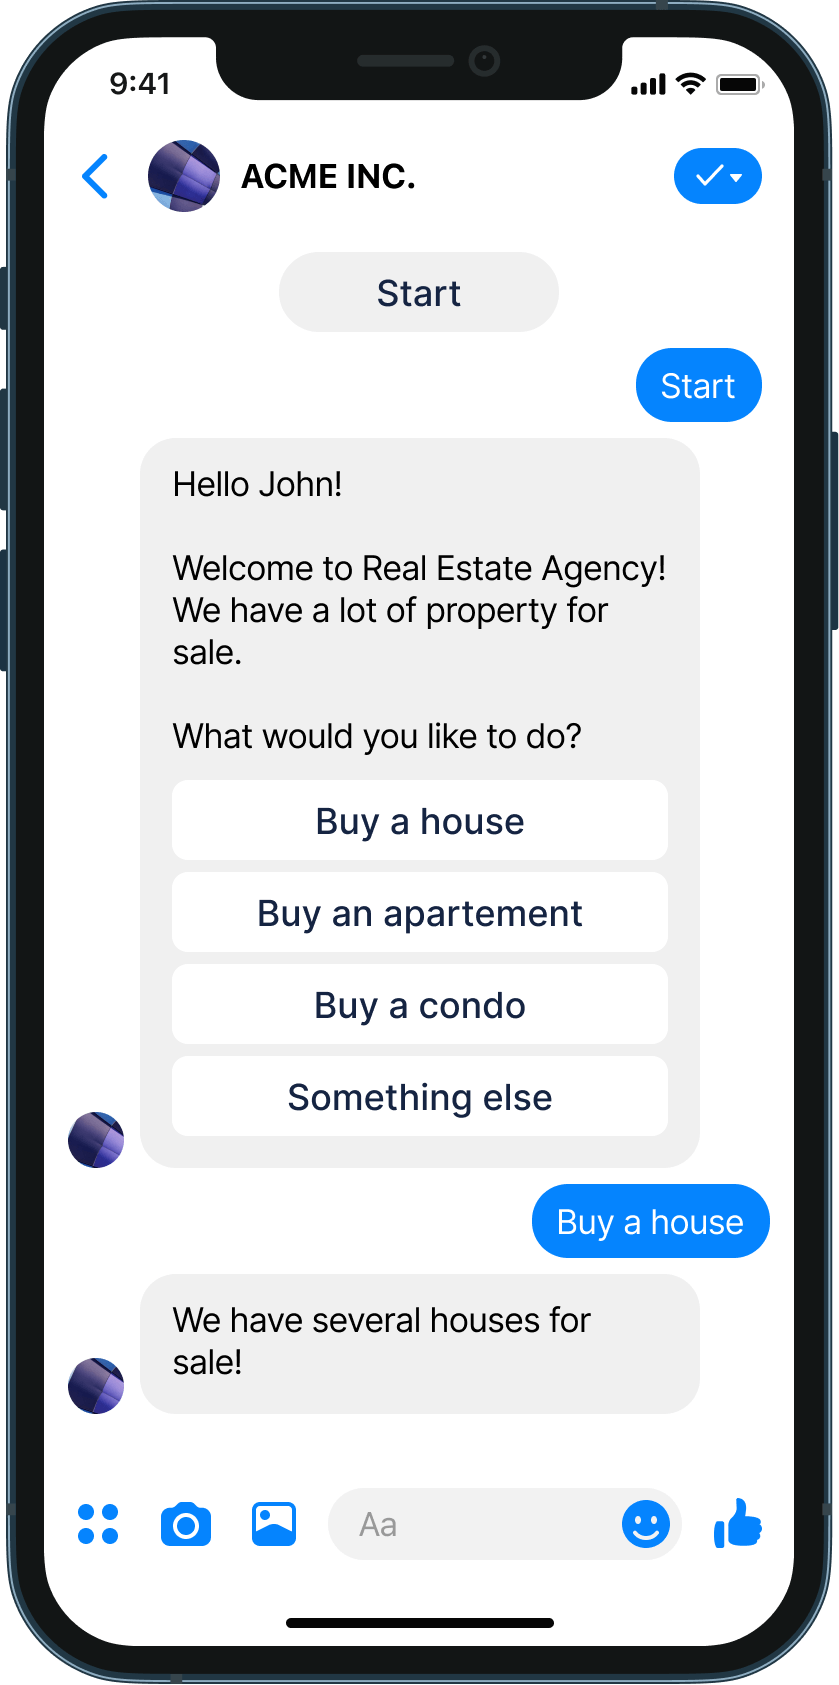 Appointment scheduling for realtors chatbot example